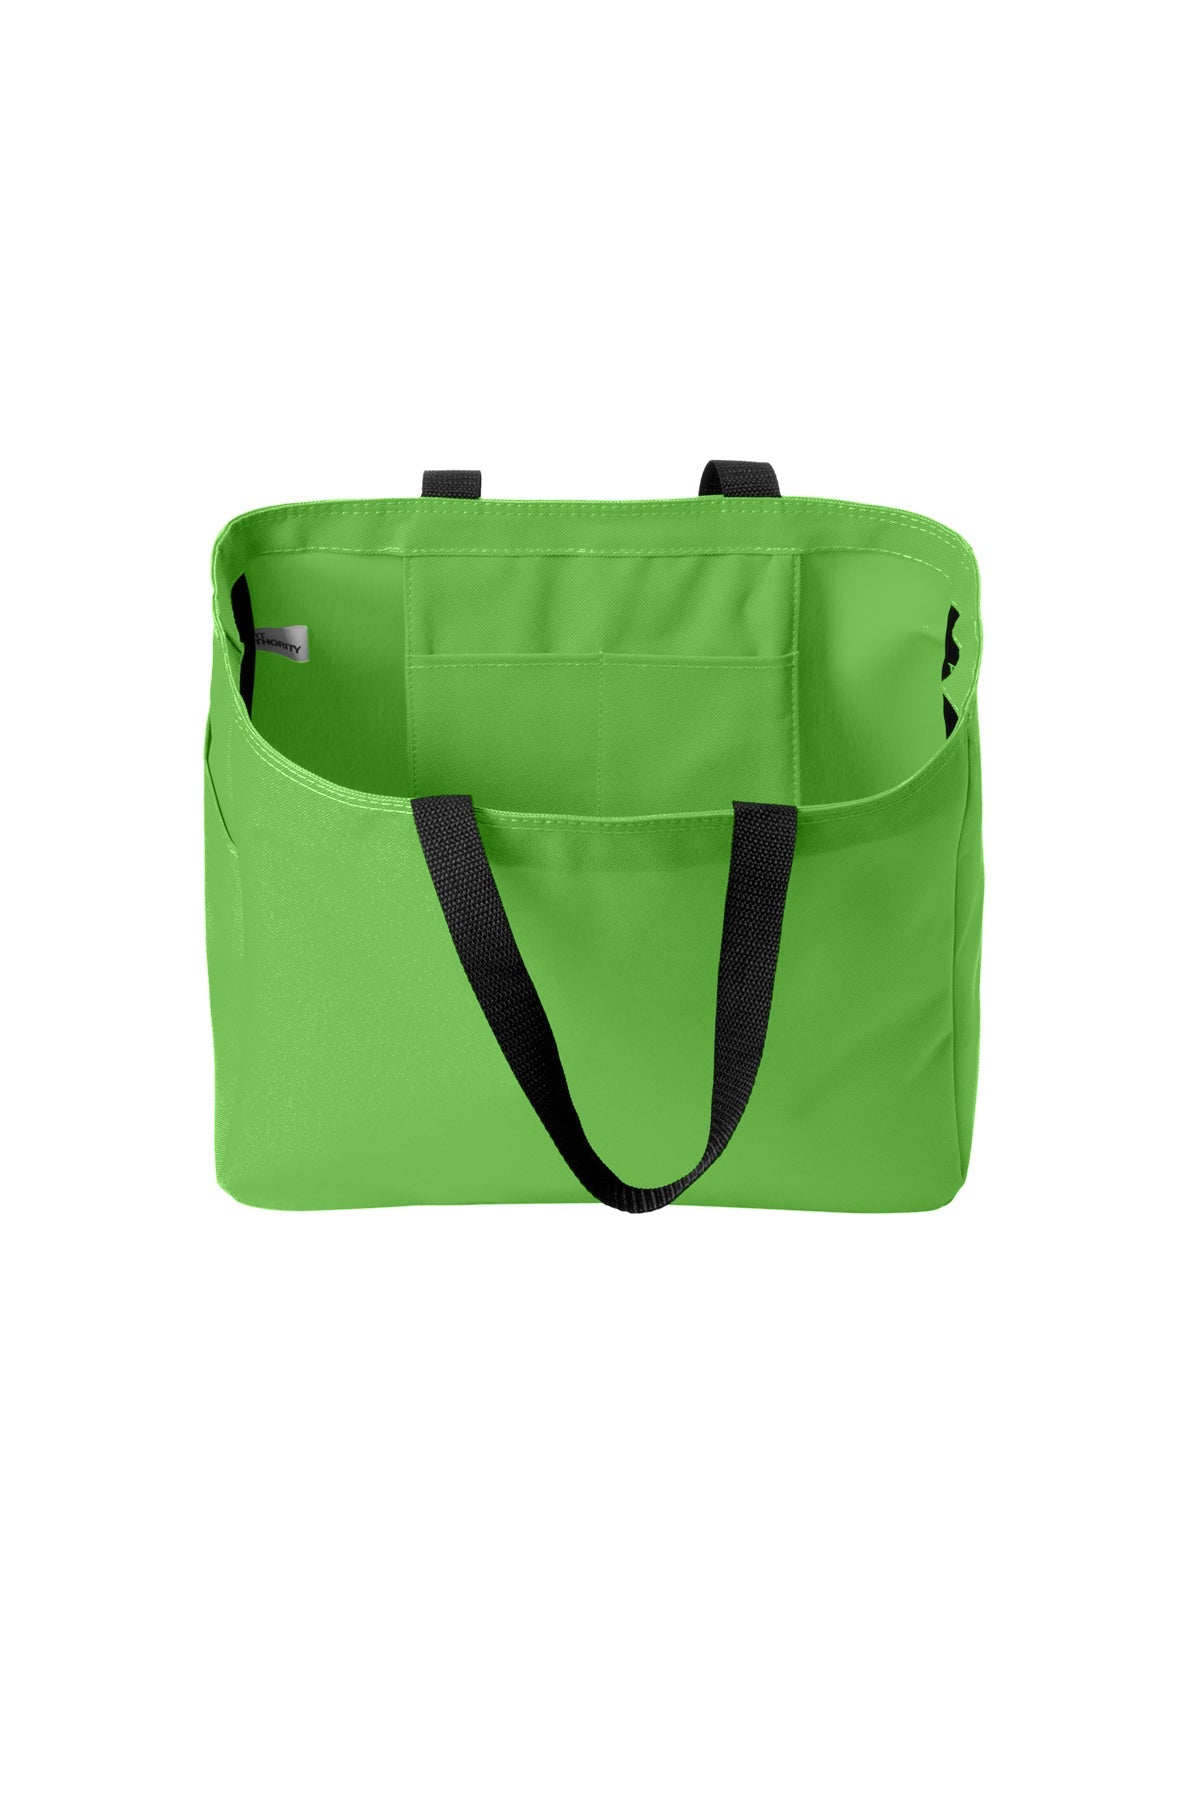 Port Authority - Essential Customized Tote, Bright Lime